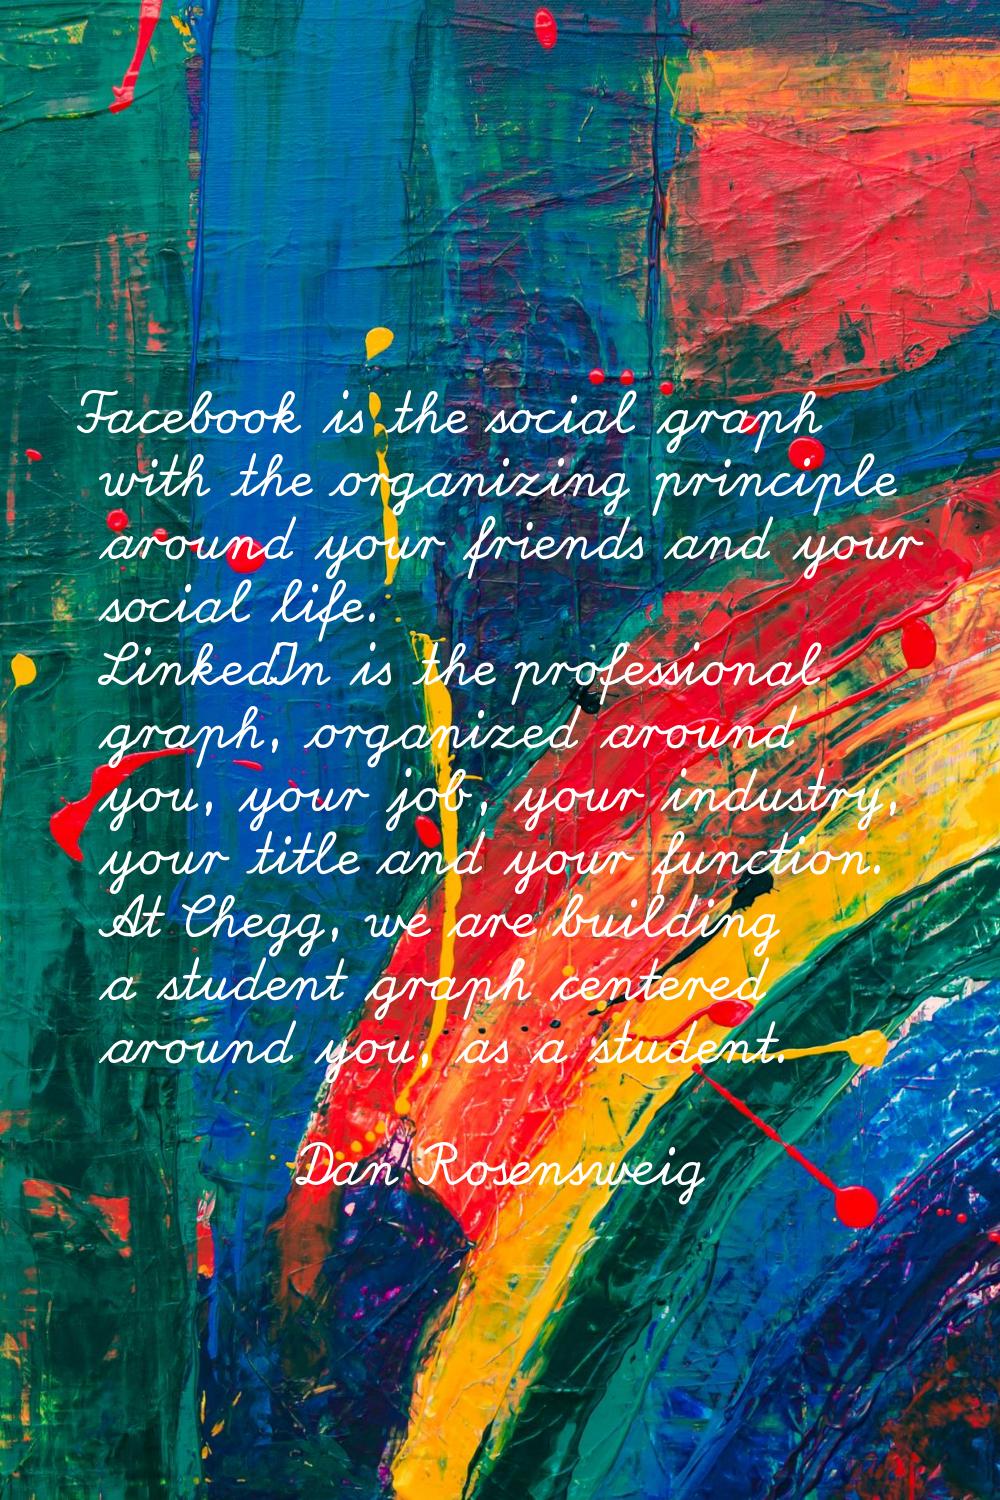 Facebook is the social graph with the organizing principle around your friends and your social life